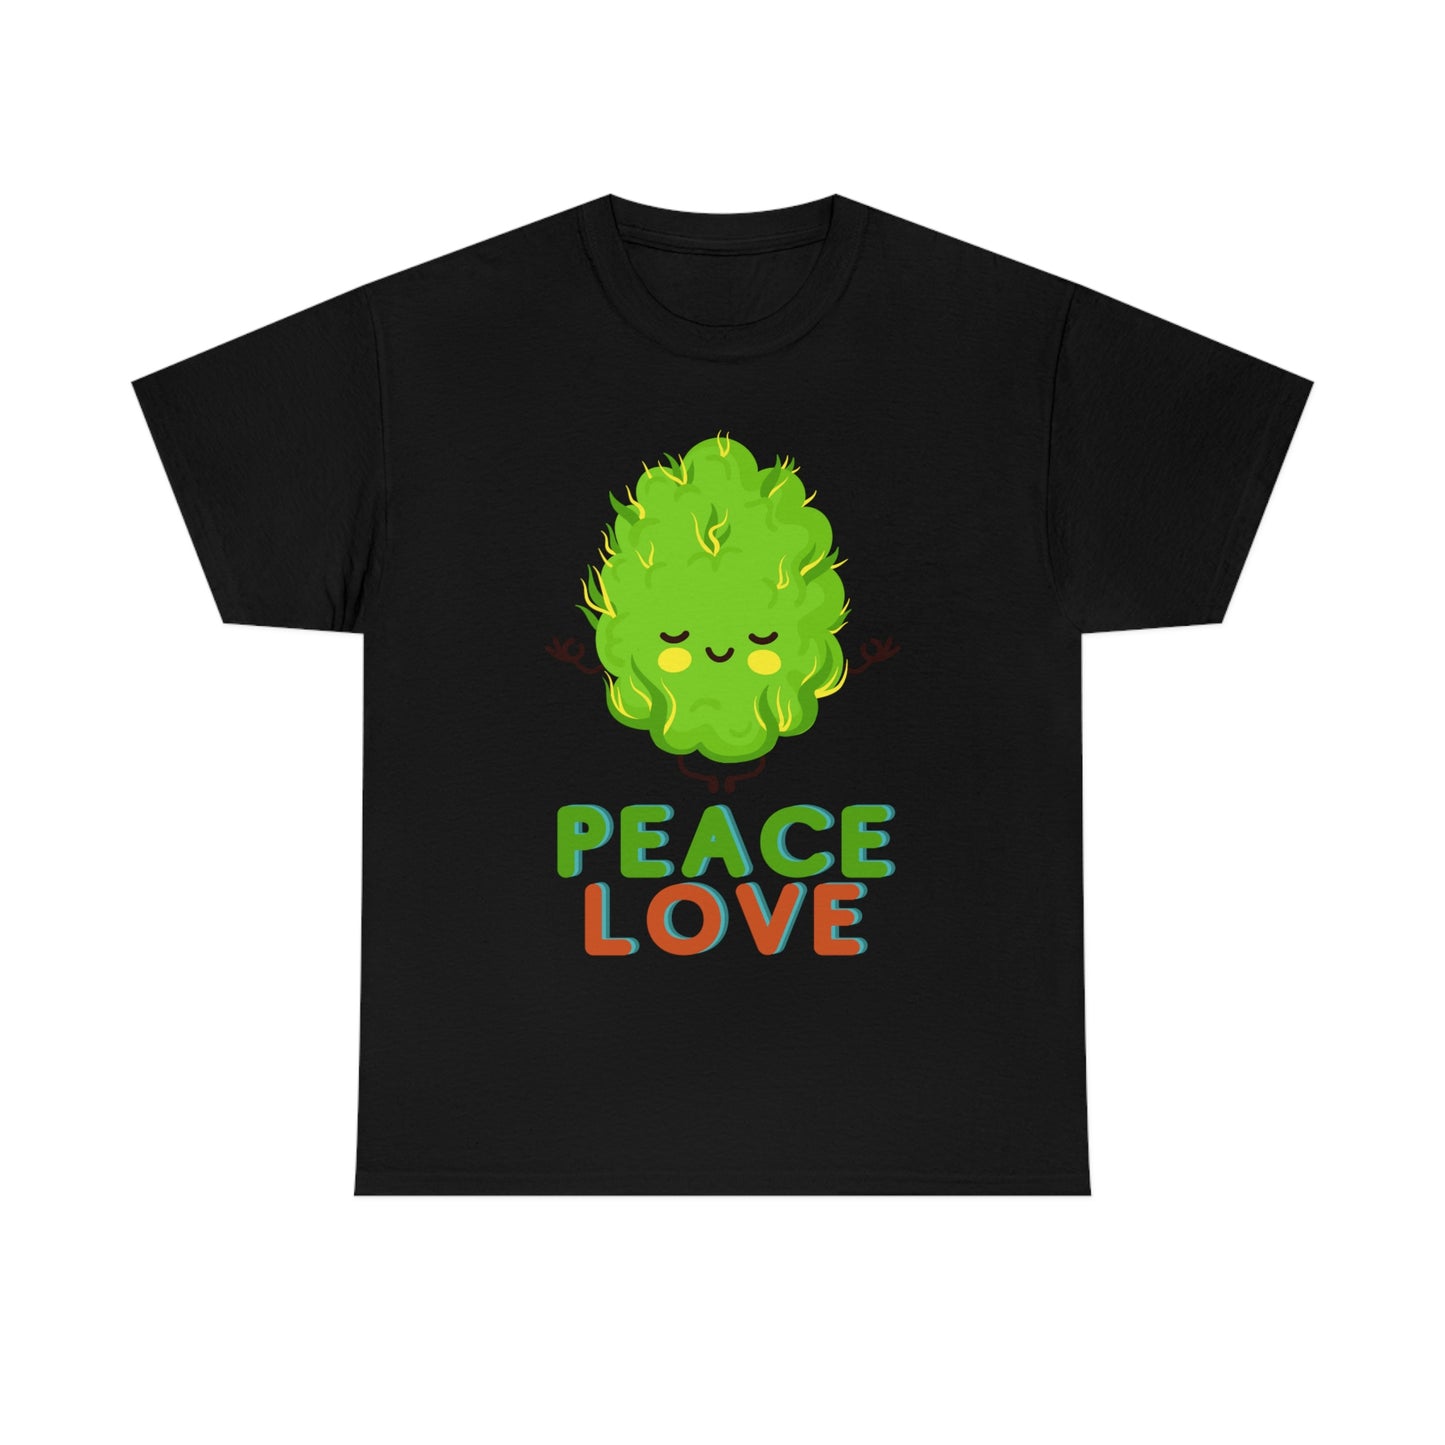 A Peace and Love Tee with the words peace love on it.